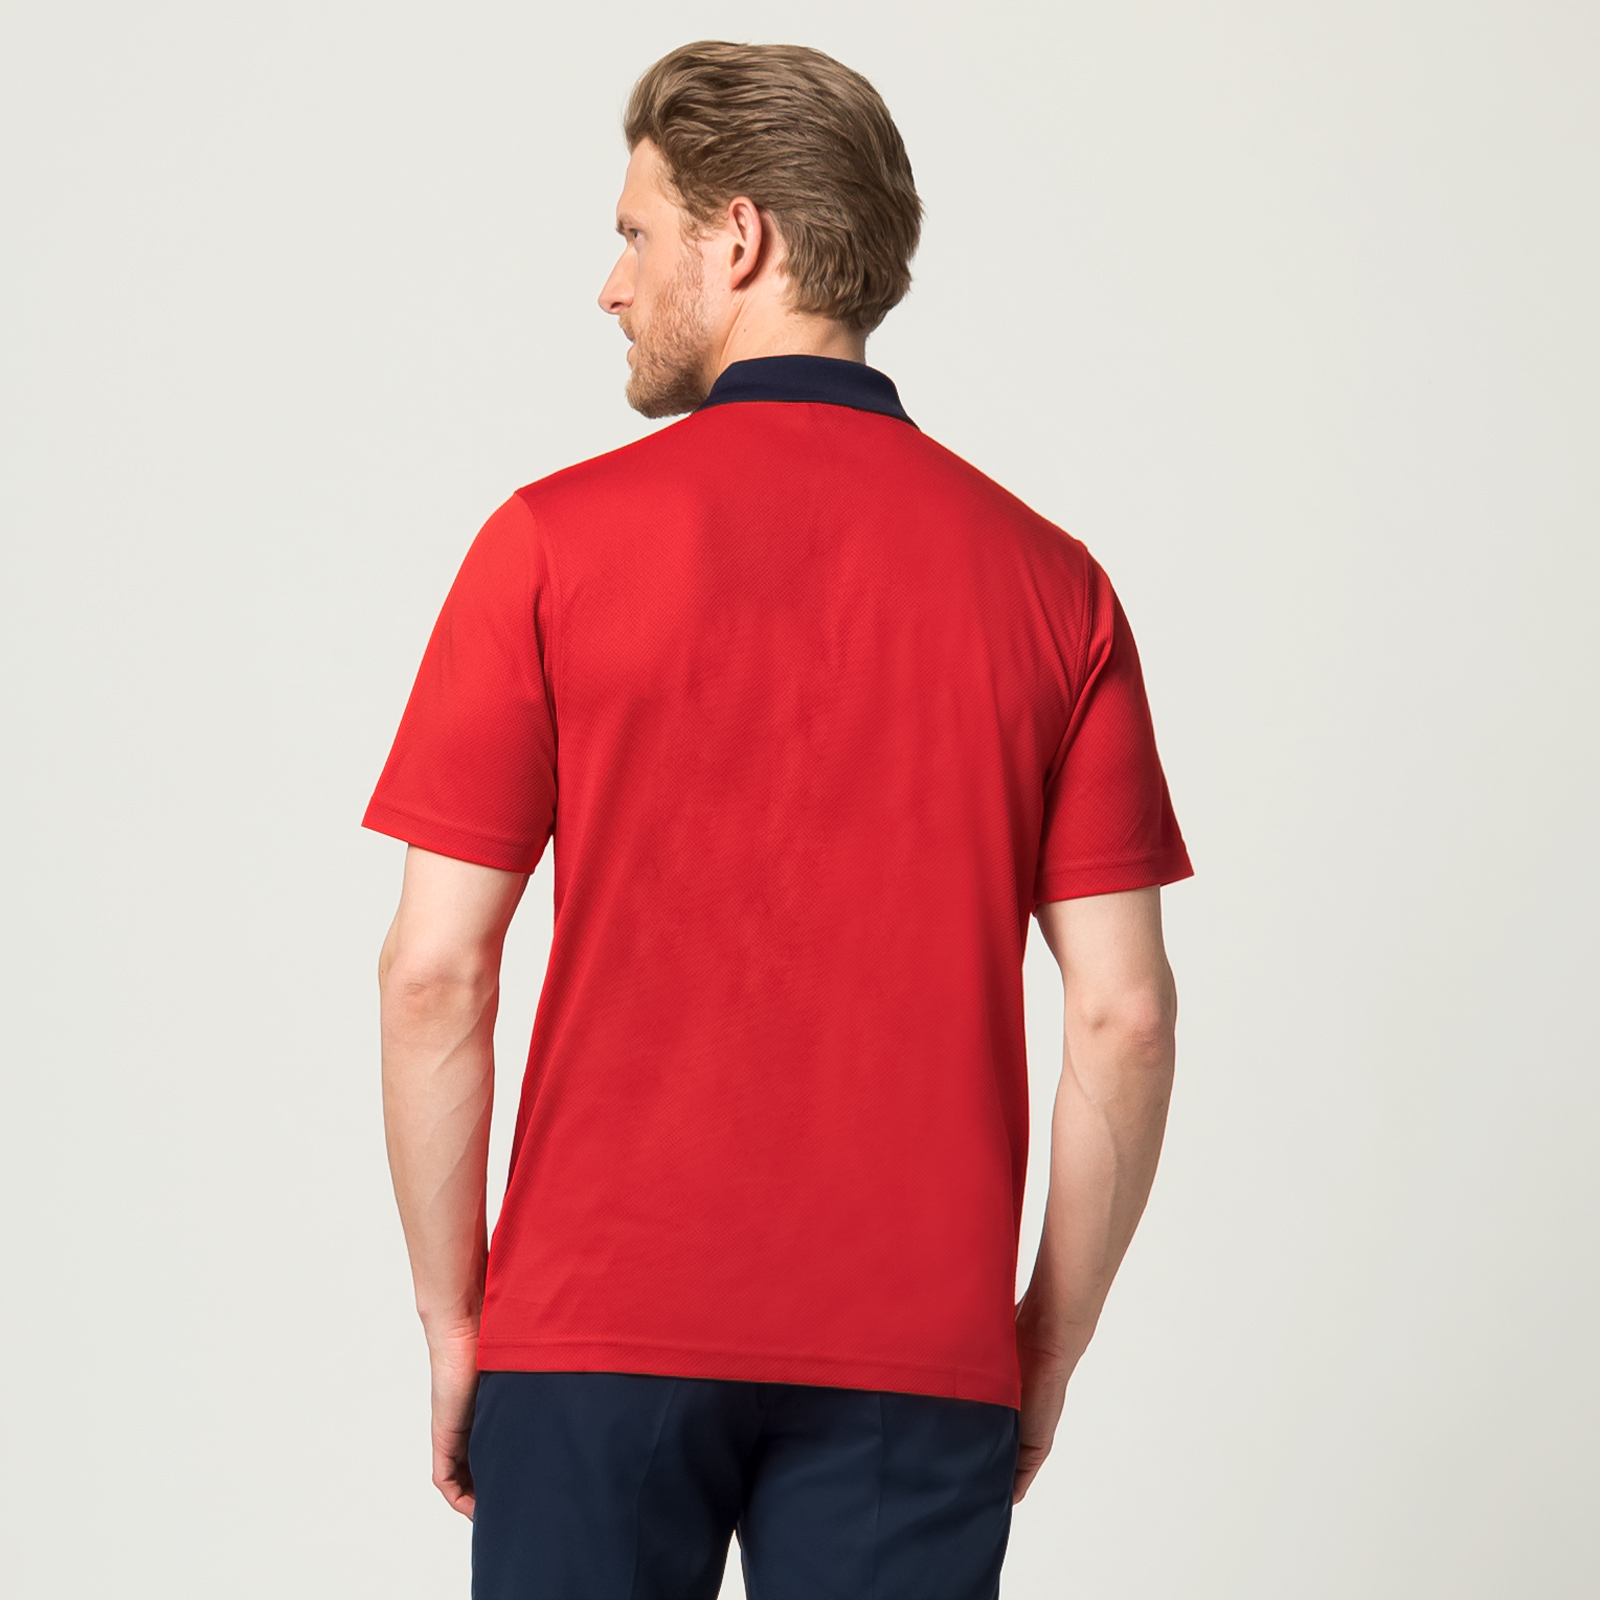 Men's golf polo made from antibacterial, moisture-regulating material